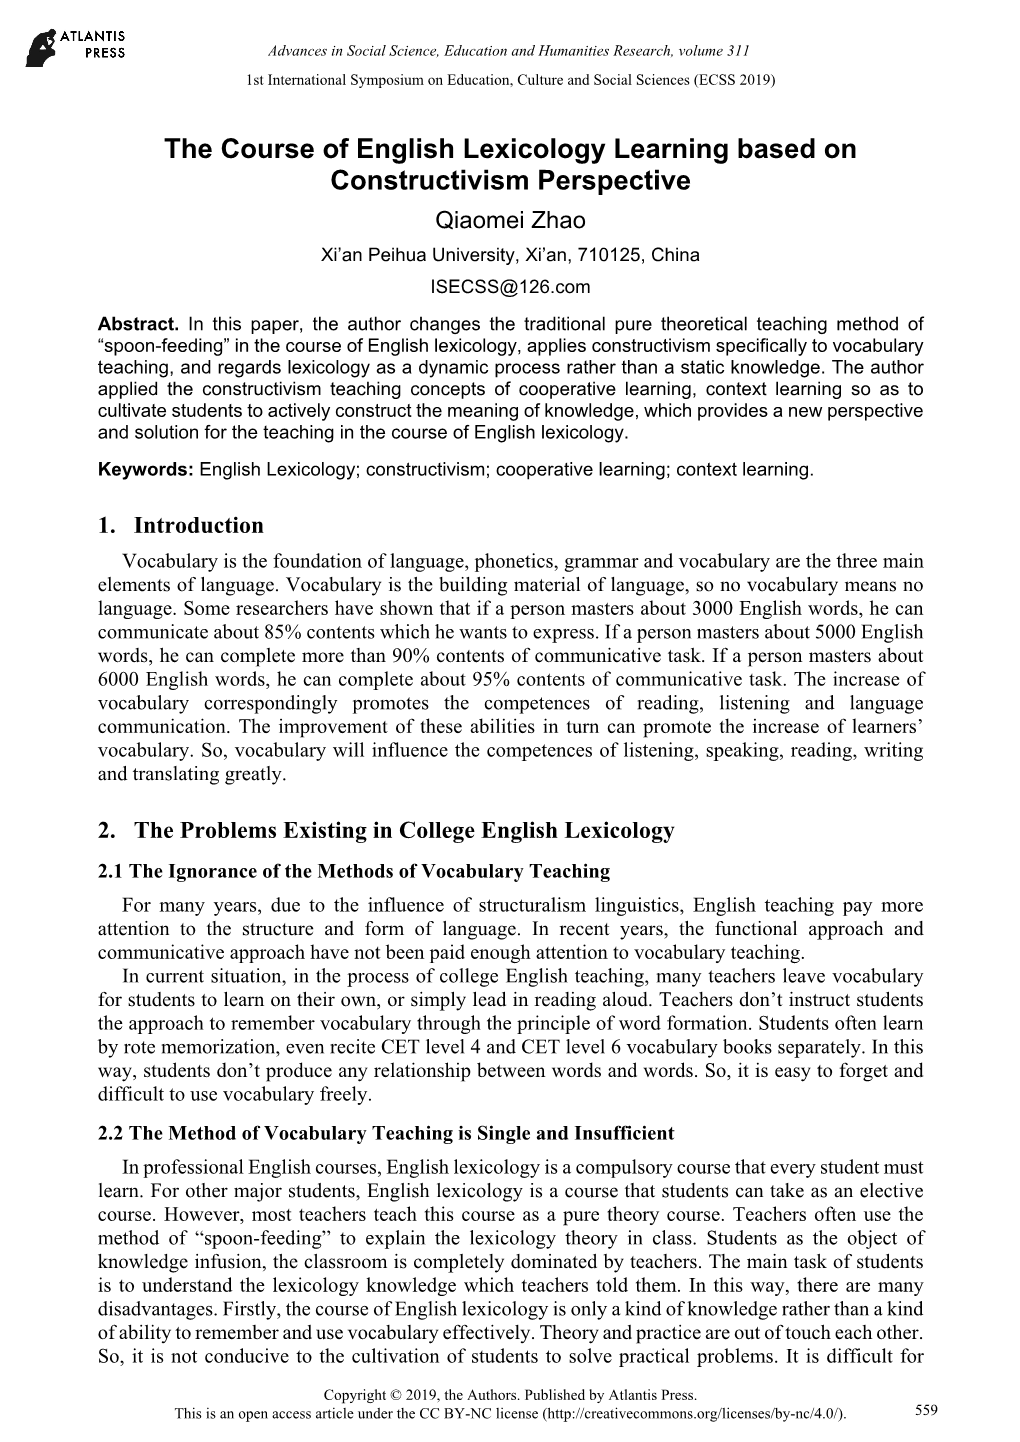 The Course of English Lexicology Learning Based on Constructivism Perspective Qiaomei Zhao Xi’An Peihua University, Xi’An, 710125, China ISECSS@126.Com Abstract